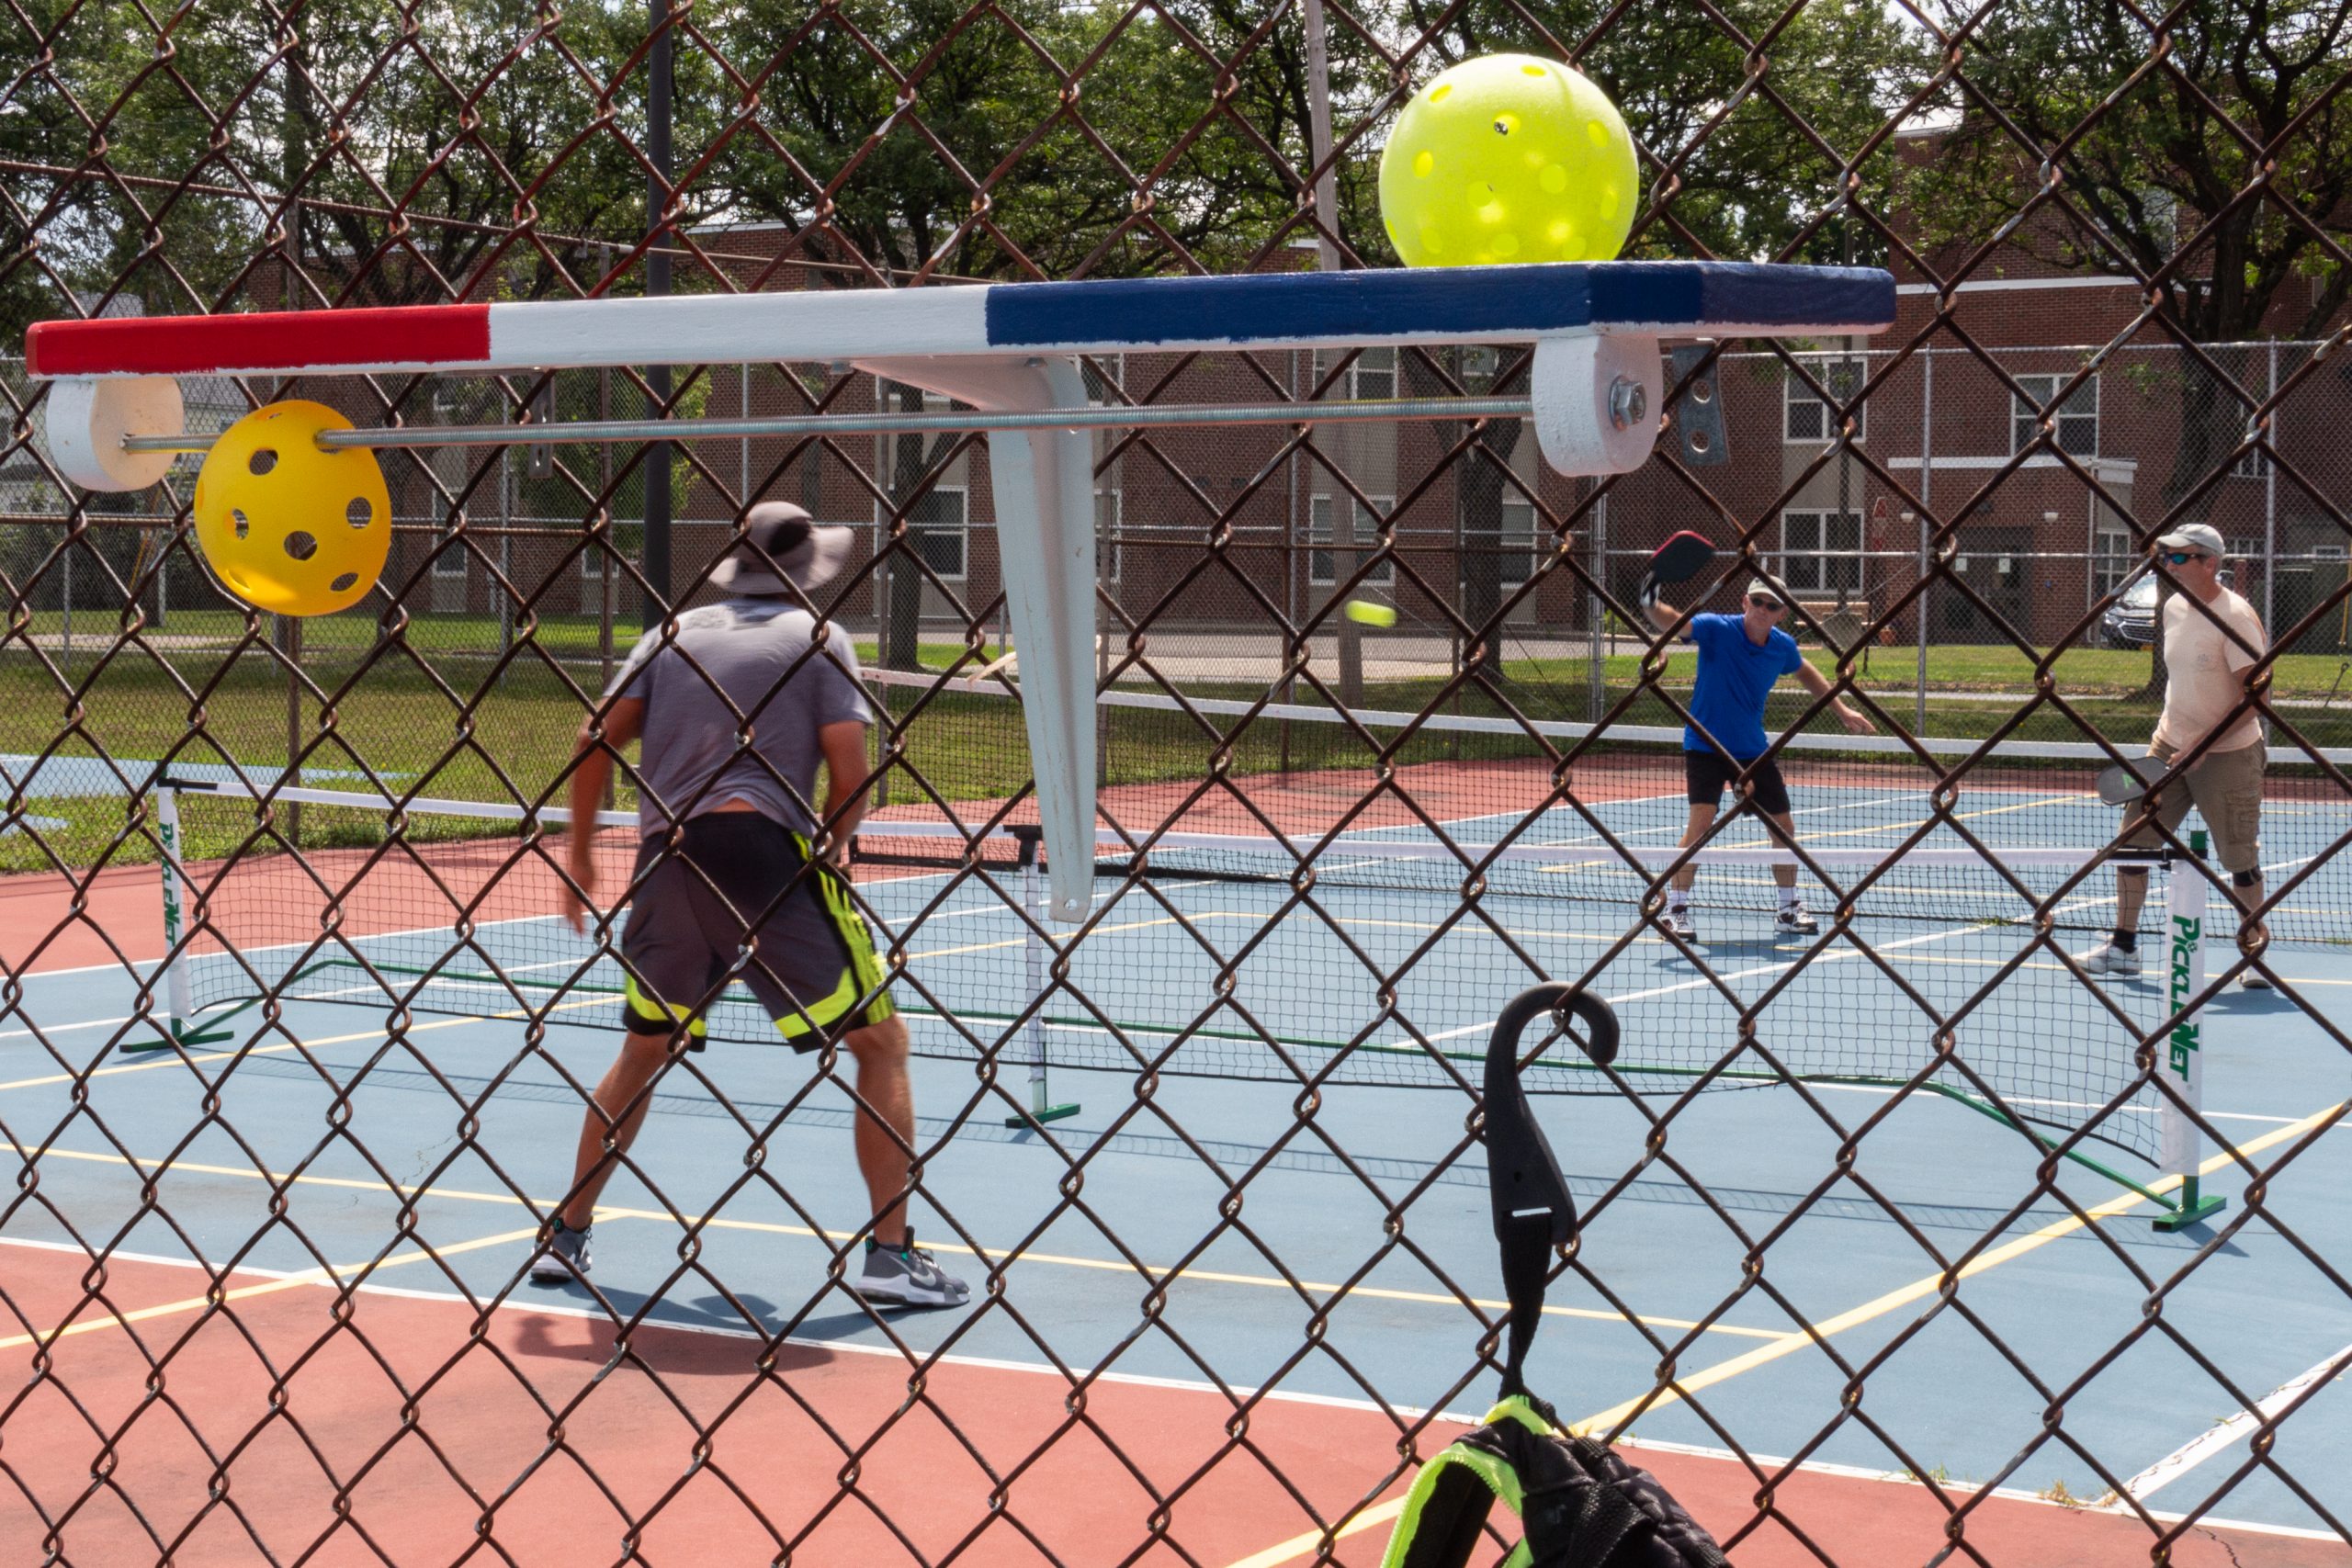 Players face off in a match at a recent pickleball tournament at Ellis Field Park.